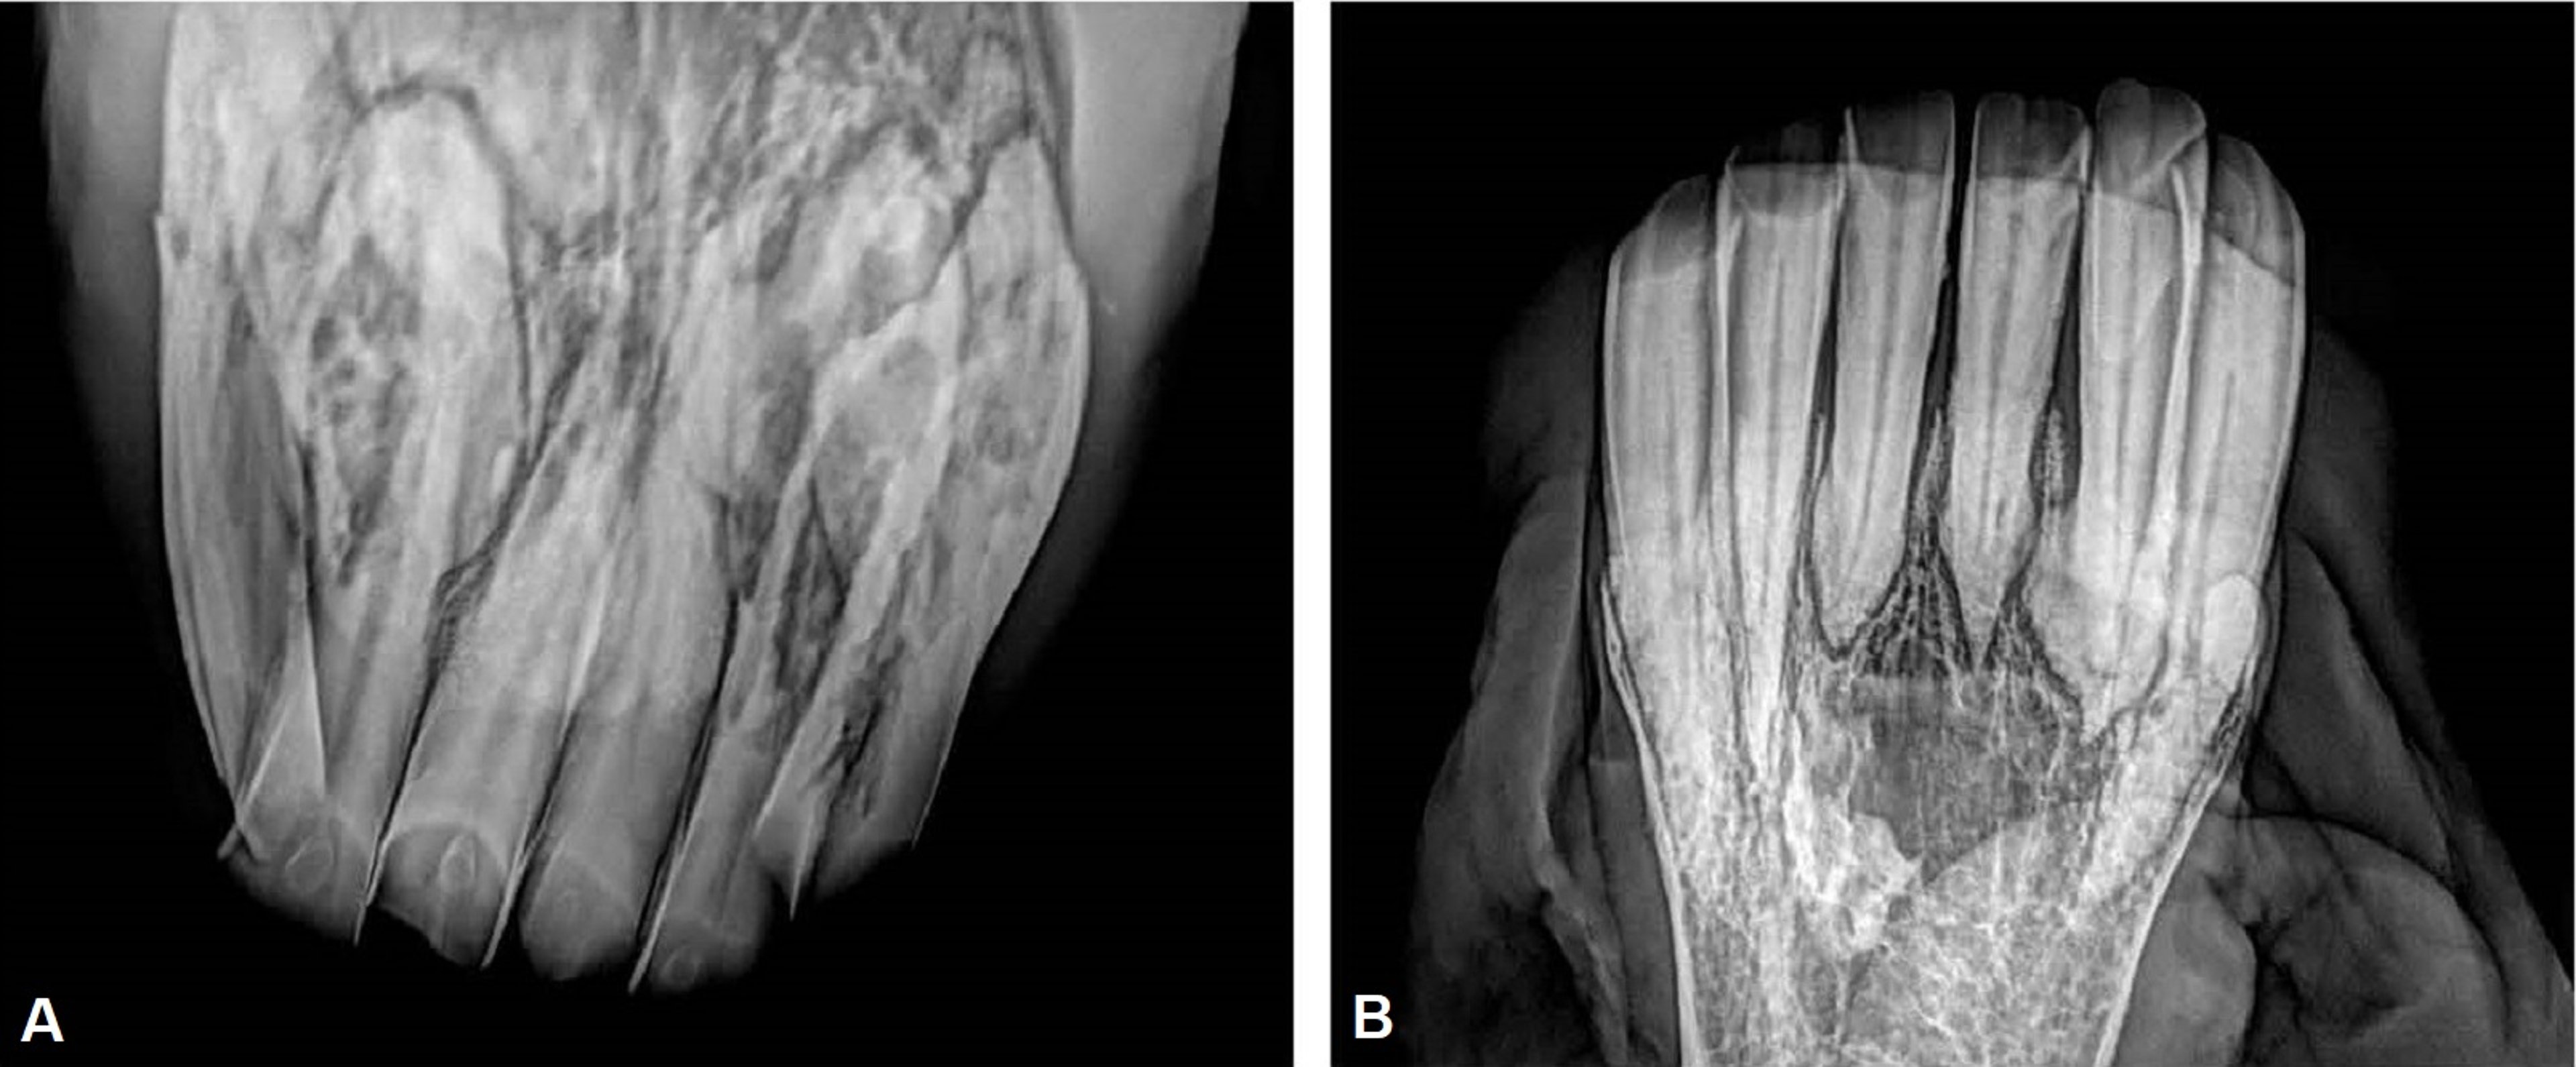 Equine odontoclastic tooth resorption and hypercementosis, radiographs